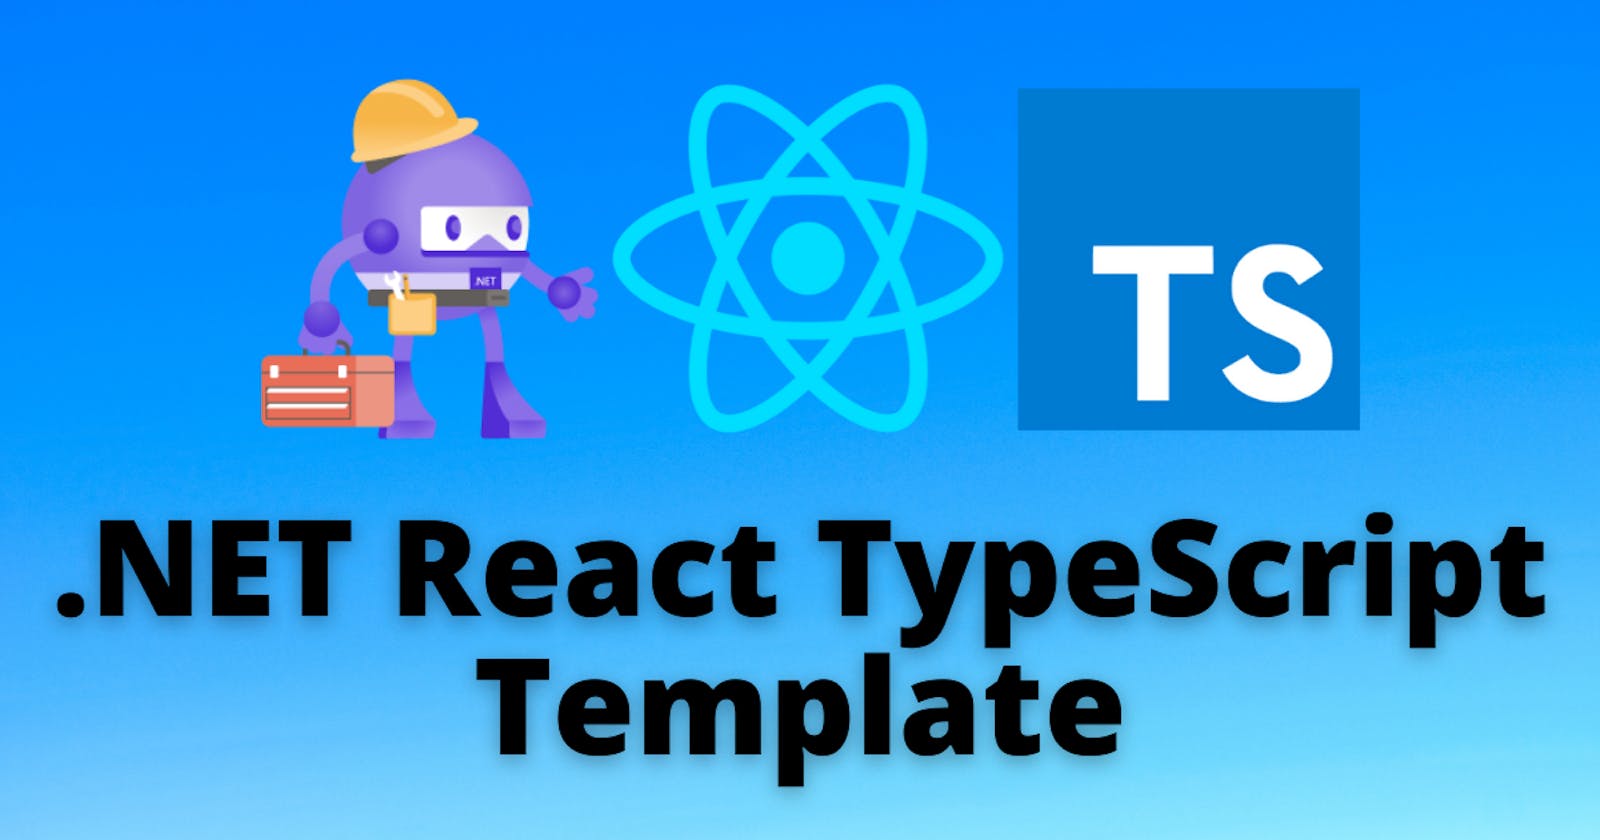 Creating the .NET React template with TypeScript